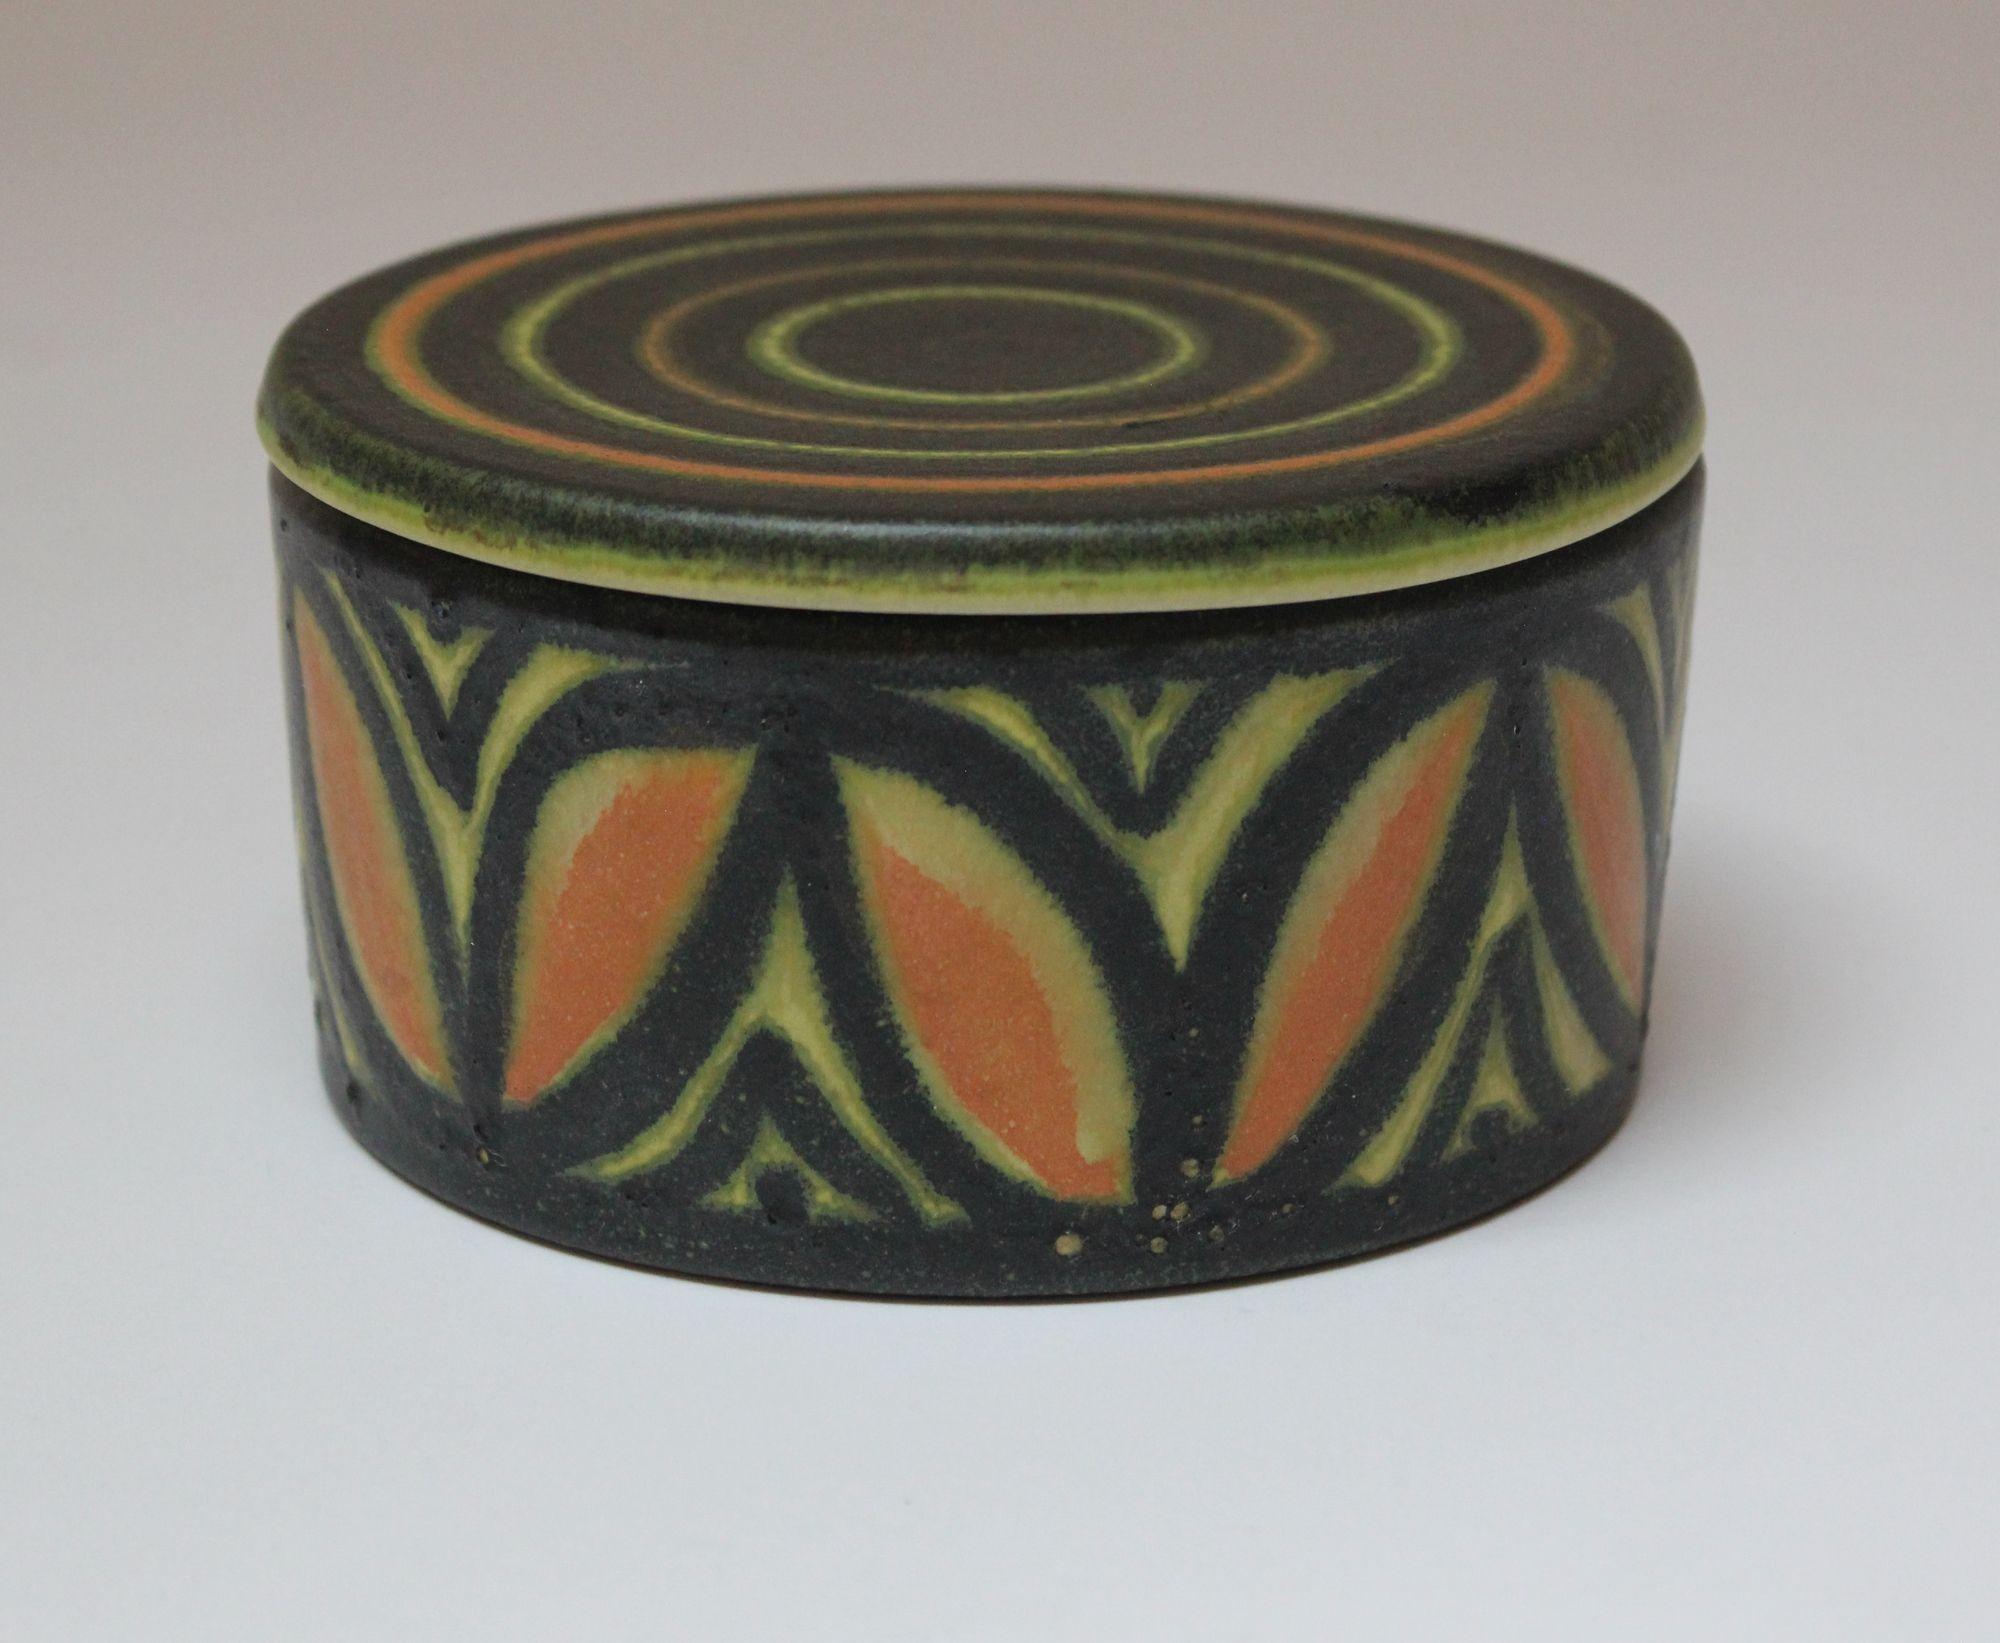 Ceramic round box / lidded jar with concentric circle and petal motif by Raymor (ca. 1960s, Italy).
Attractive palette and design in excellent, vintage condition.
Unsigned.
H: 2.63